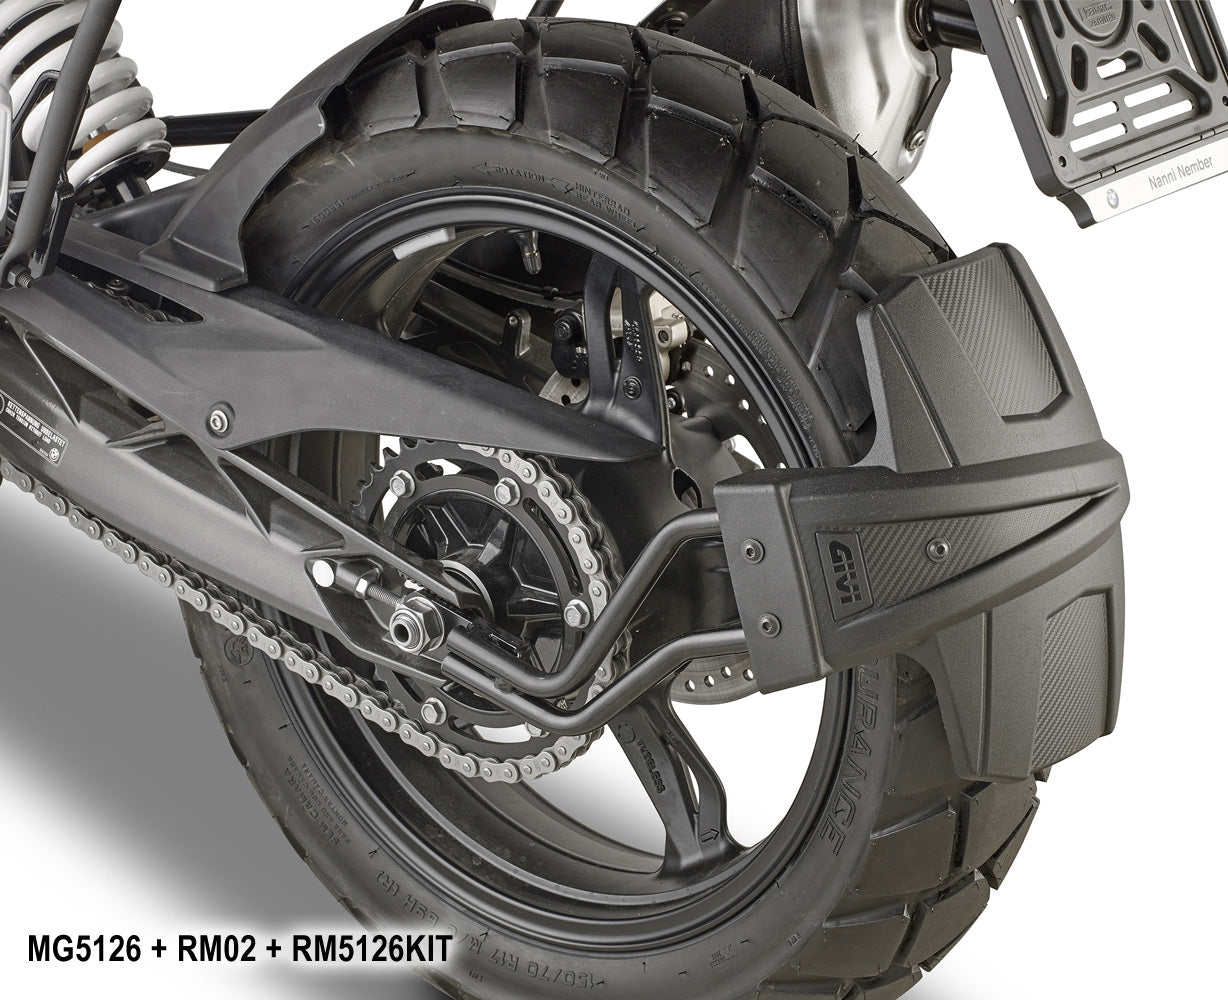 Specific install kit to mount Rear Wheel Side Mount Fender RM01 or RM02 on BMW G 310 GS